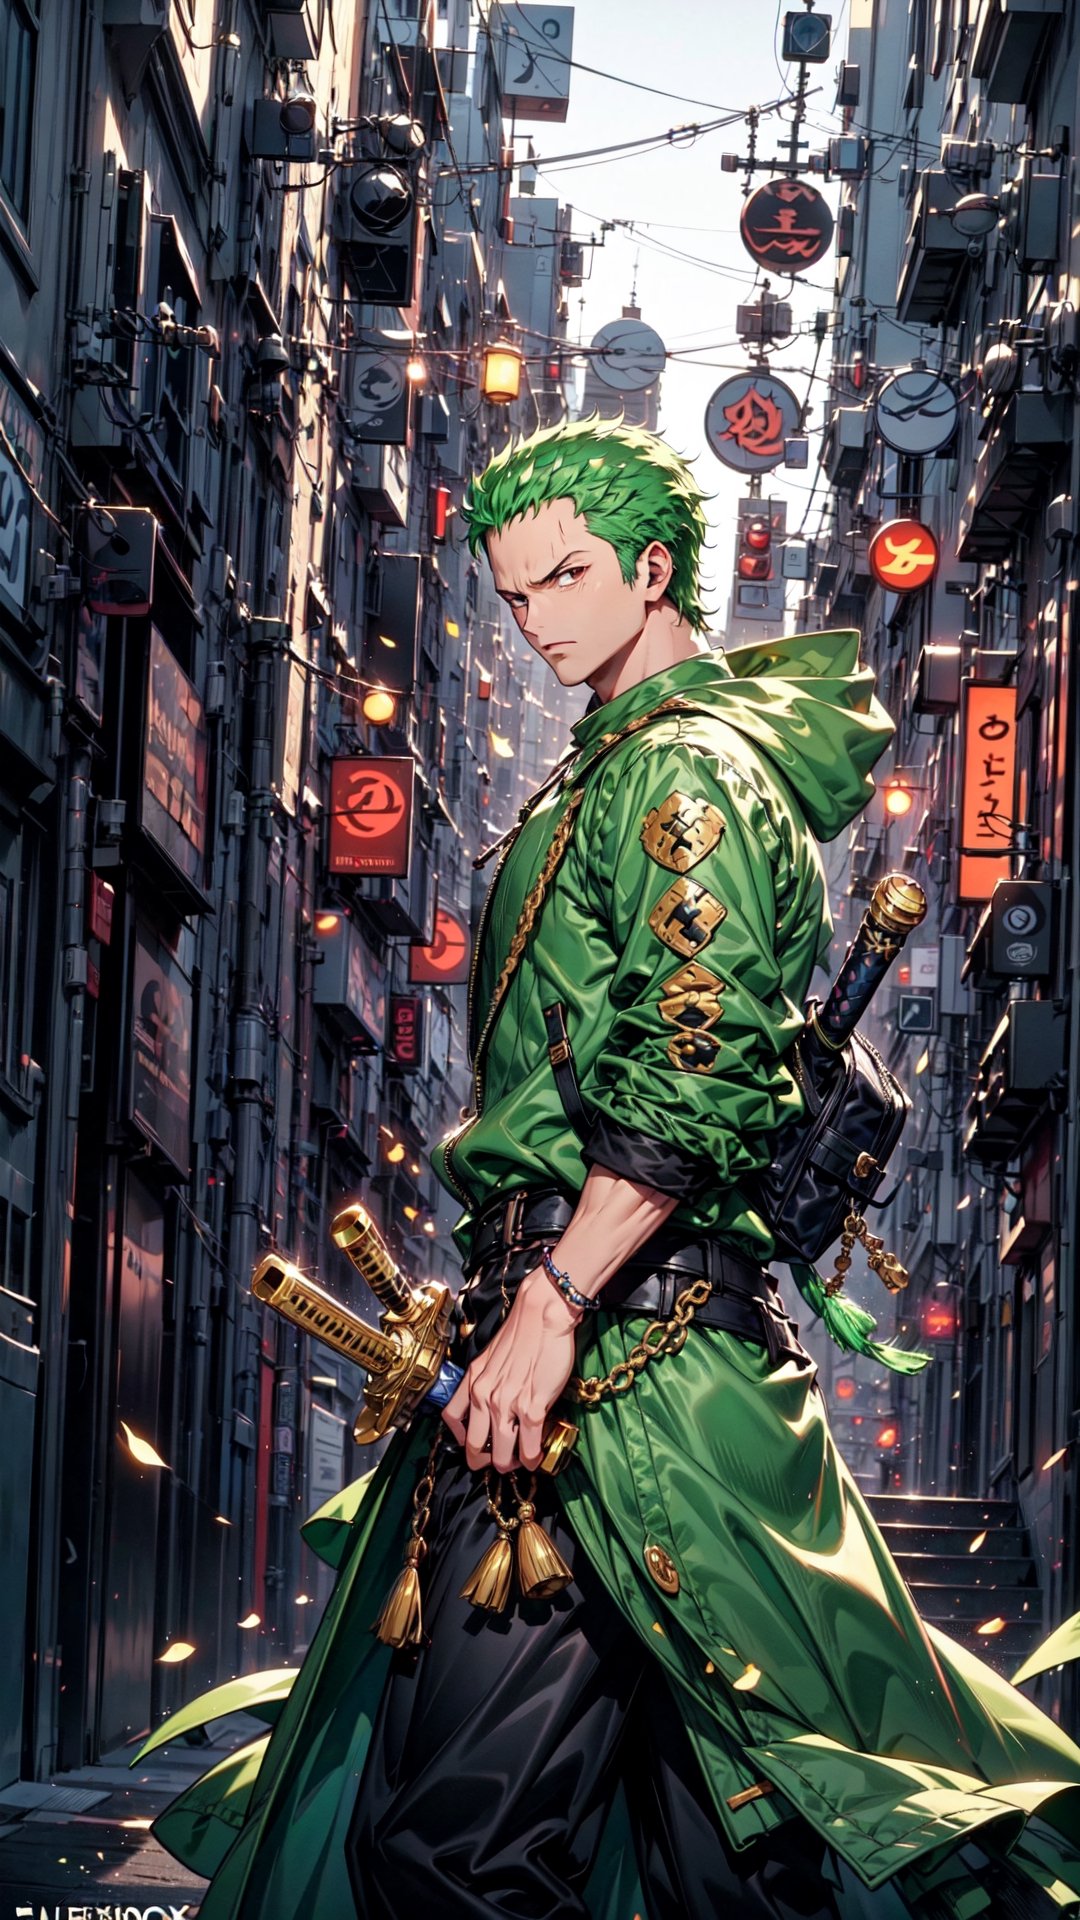  Roronoa Zoro, the iconic character from the One Piece anime:

"Generate a striking and highly detailed visual representation of the legendary swordsman, Roronoa Zoro, from the One Piece anime. Zoro is known for his distinctive appearance and formidable skills.

His hair is a vibrant shade of green, complementing his determined brown eyes. He stands tall and resolute, exuding an air of strength and unwavering determination. Zoro is clad in his signature green outfit, complete with a white haramaki and a bandana.

In his skilled hands, he wields not one but two katana swords, each one unique and finely detailed. The swords should be a reflection of his mastery and the essence of his character.

This image should capture the essence of Zoro's iconic appearance, showcasing his powerful presence and his status as one of the most beloved characters in the One Piece series." Photographic cinematic super super high detailed super realistic image, 8k HDR super high quality image, masterpiece,perfecteyes,zoro, ((perfect hands)), ((super high detailed image)), ((perfect swords)), ,Cyberpunk